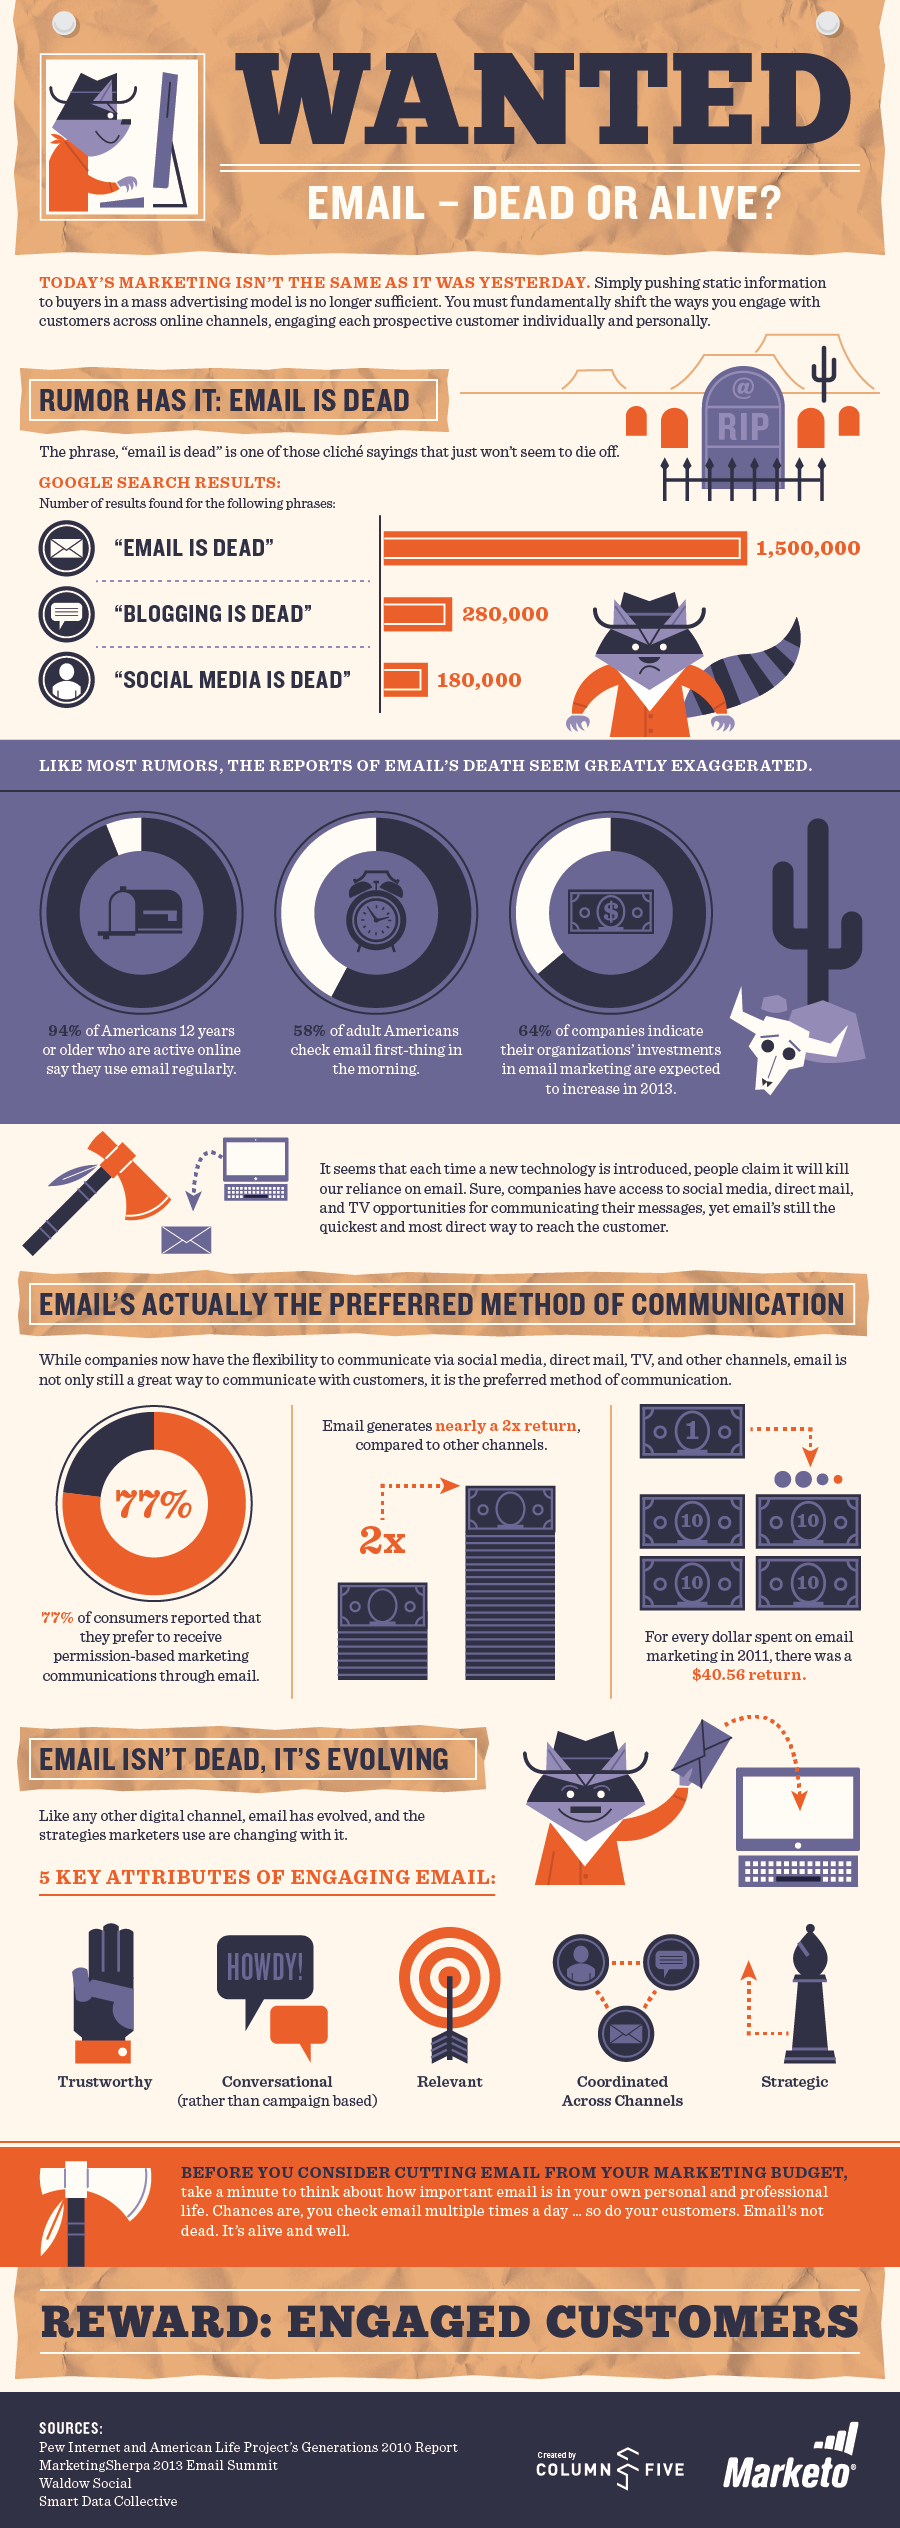 Infographic from Marketo email not dead